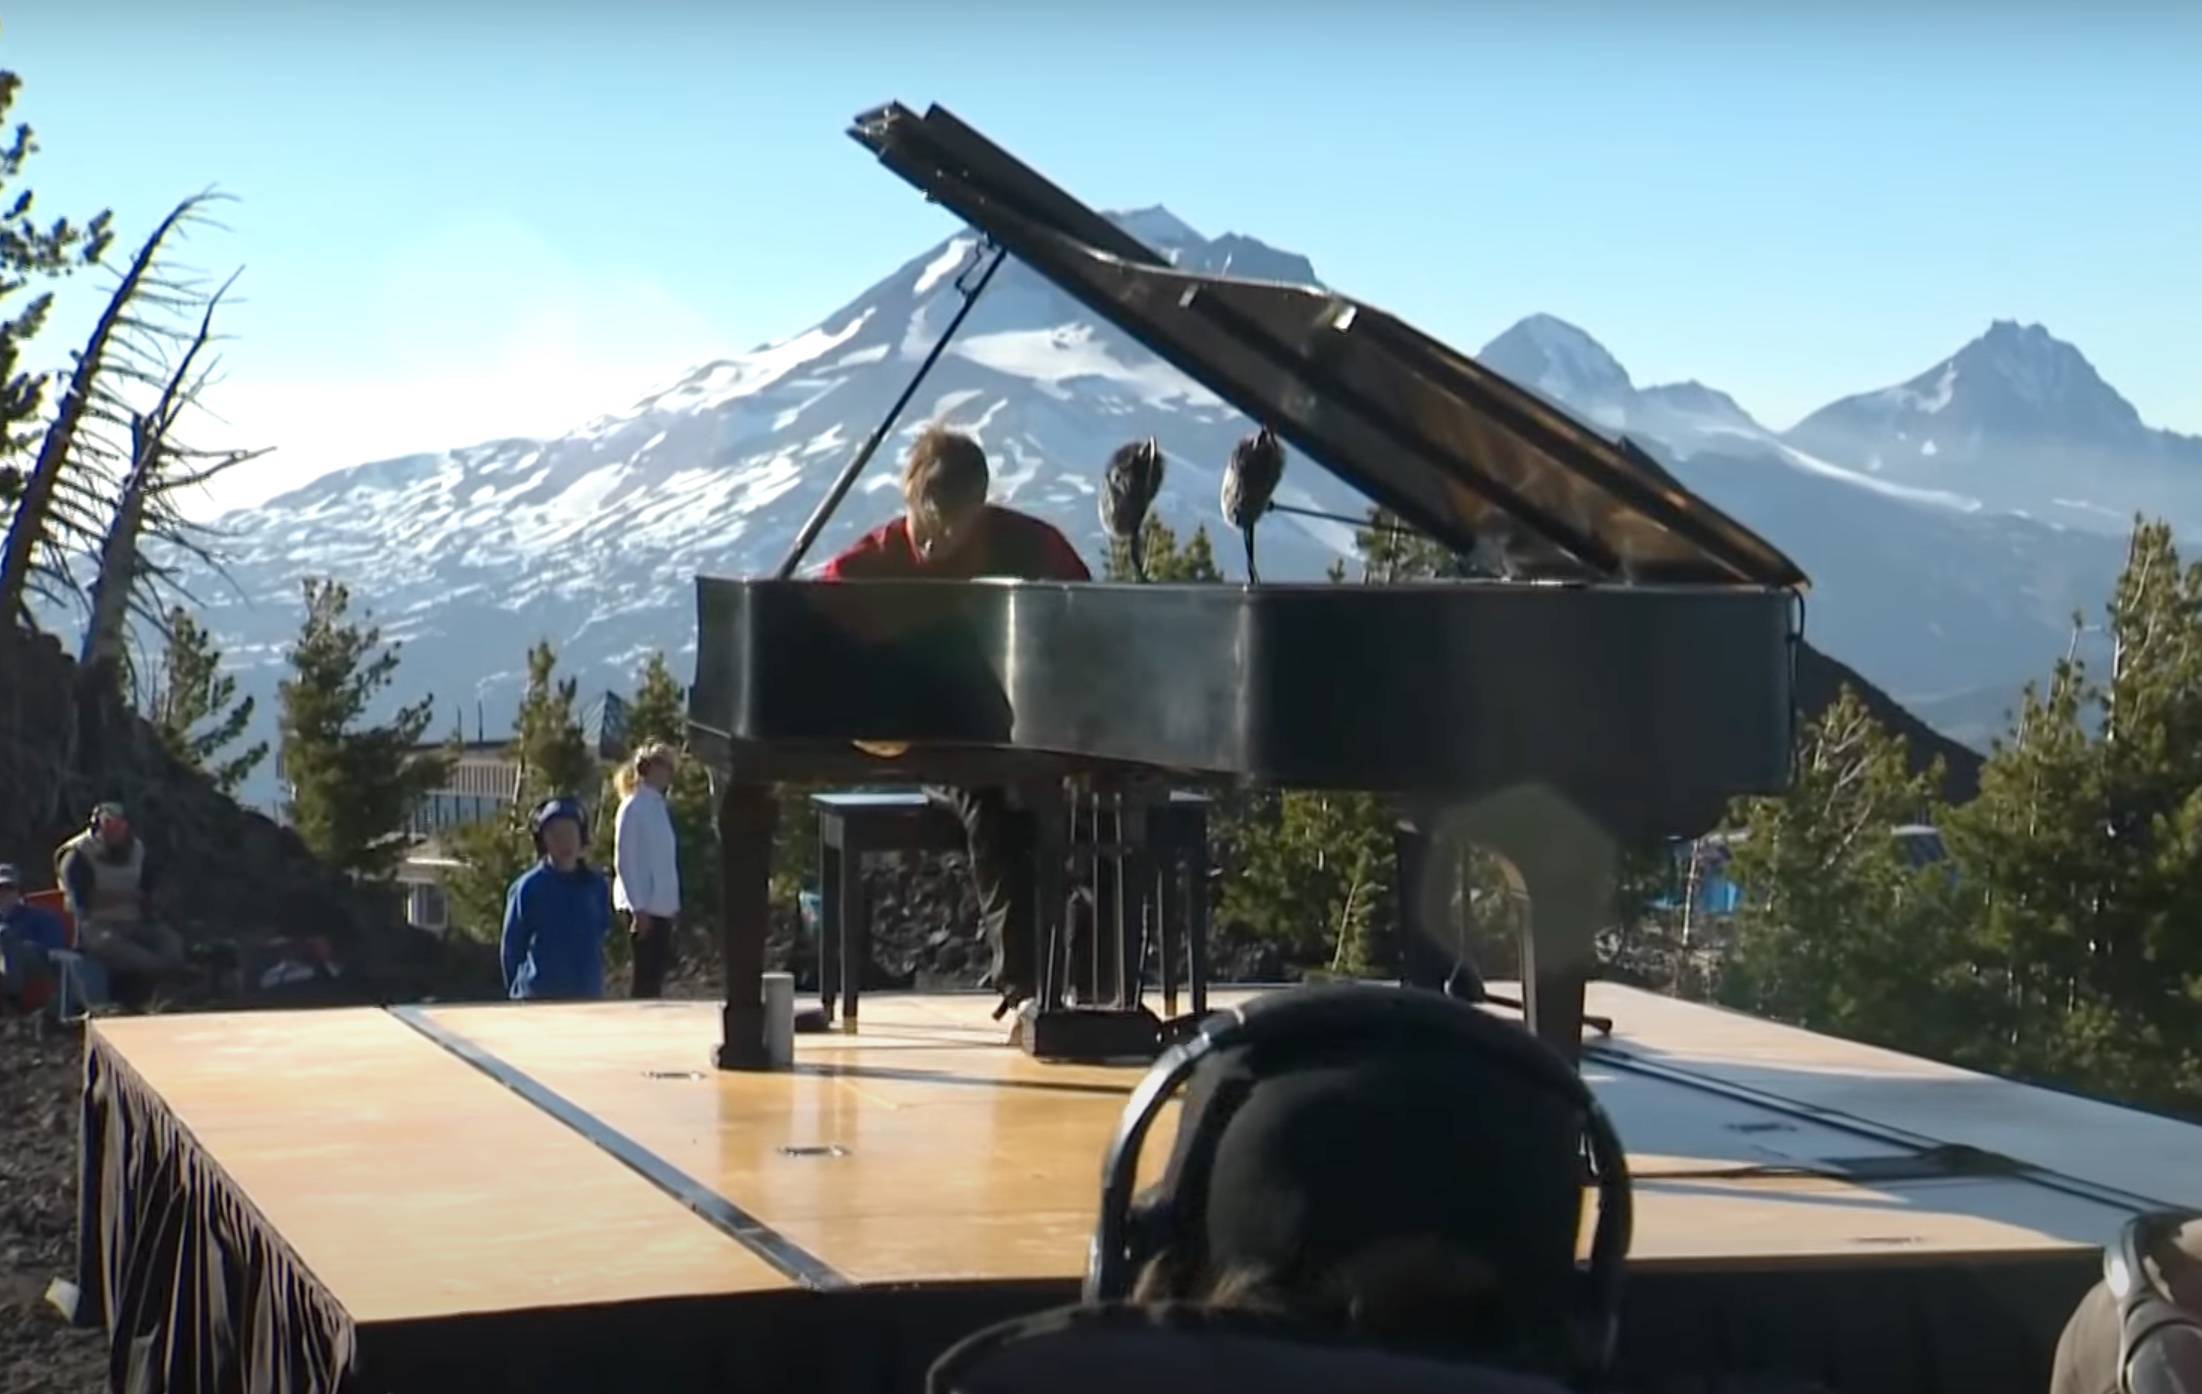 Outdoor Piano Concert Held At The Top of Mount Bachelor